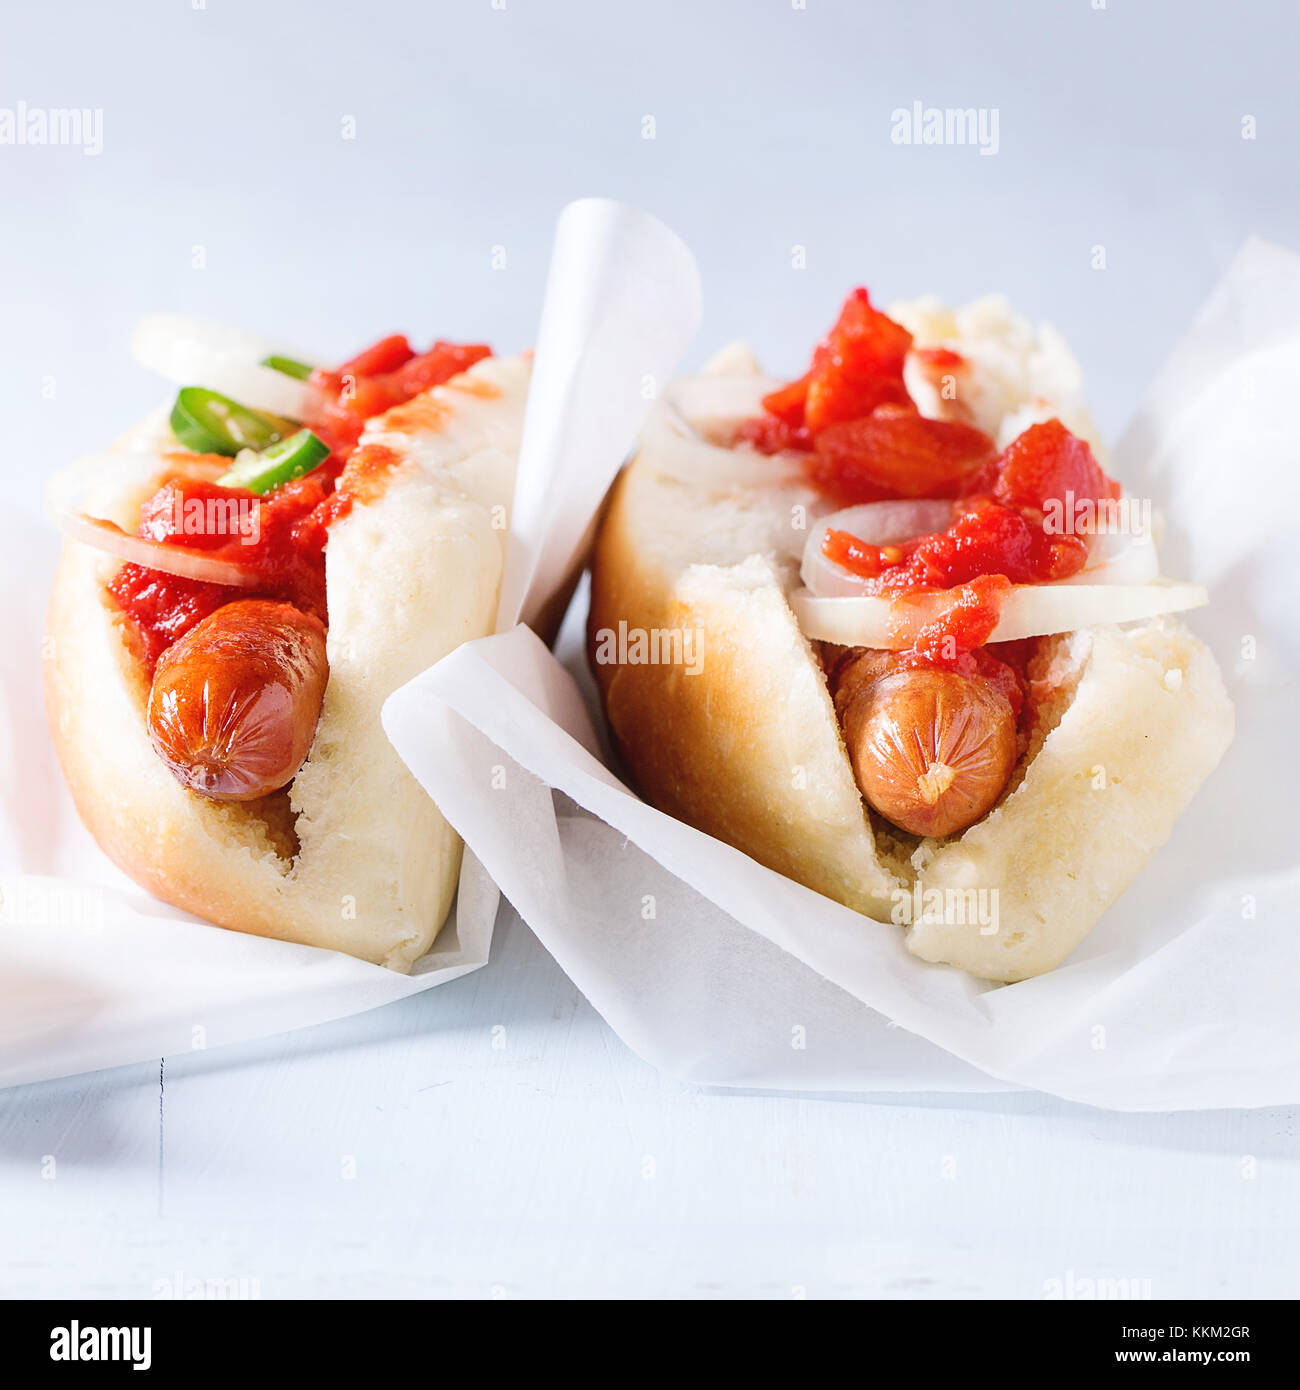 Homemade hot dogs on baking papper with tomato sauce, onion, pepper on light blue wooden background. Square image with selective focus Stock Photo